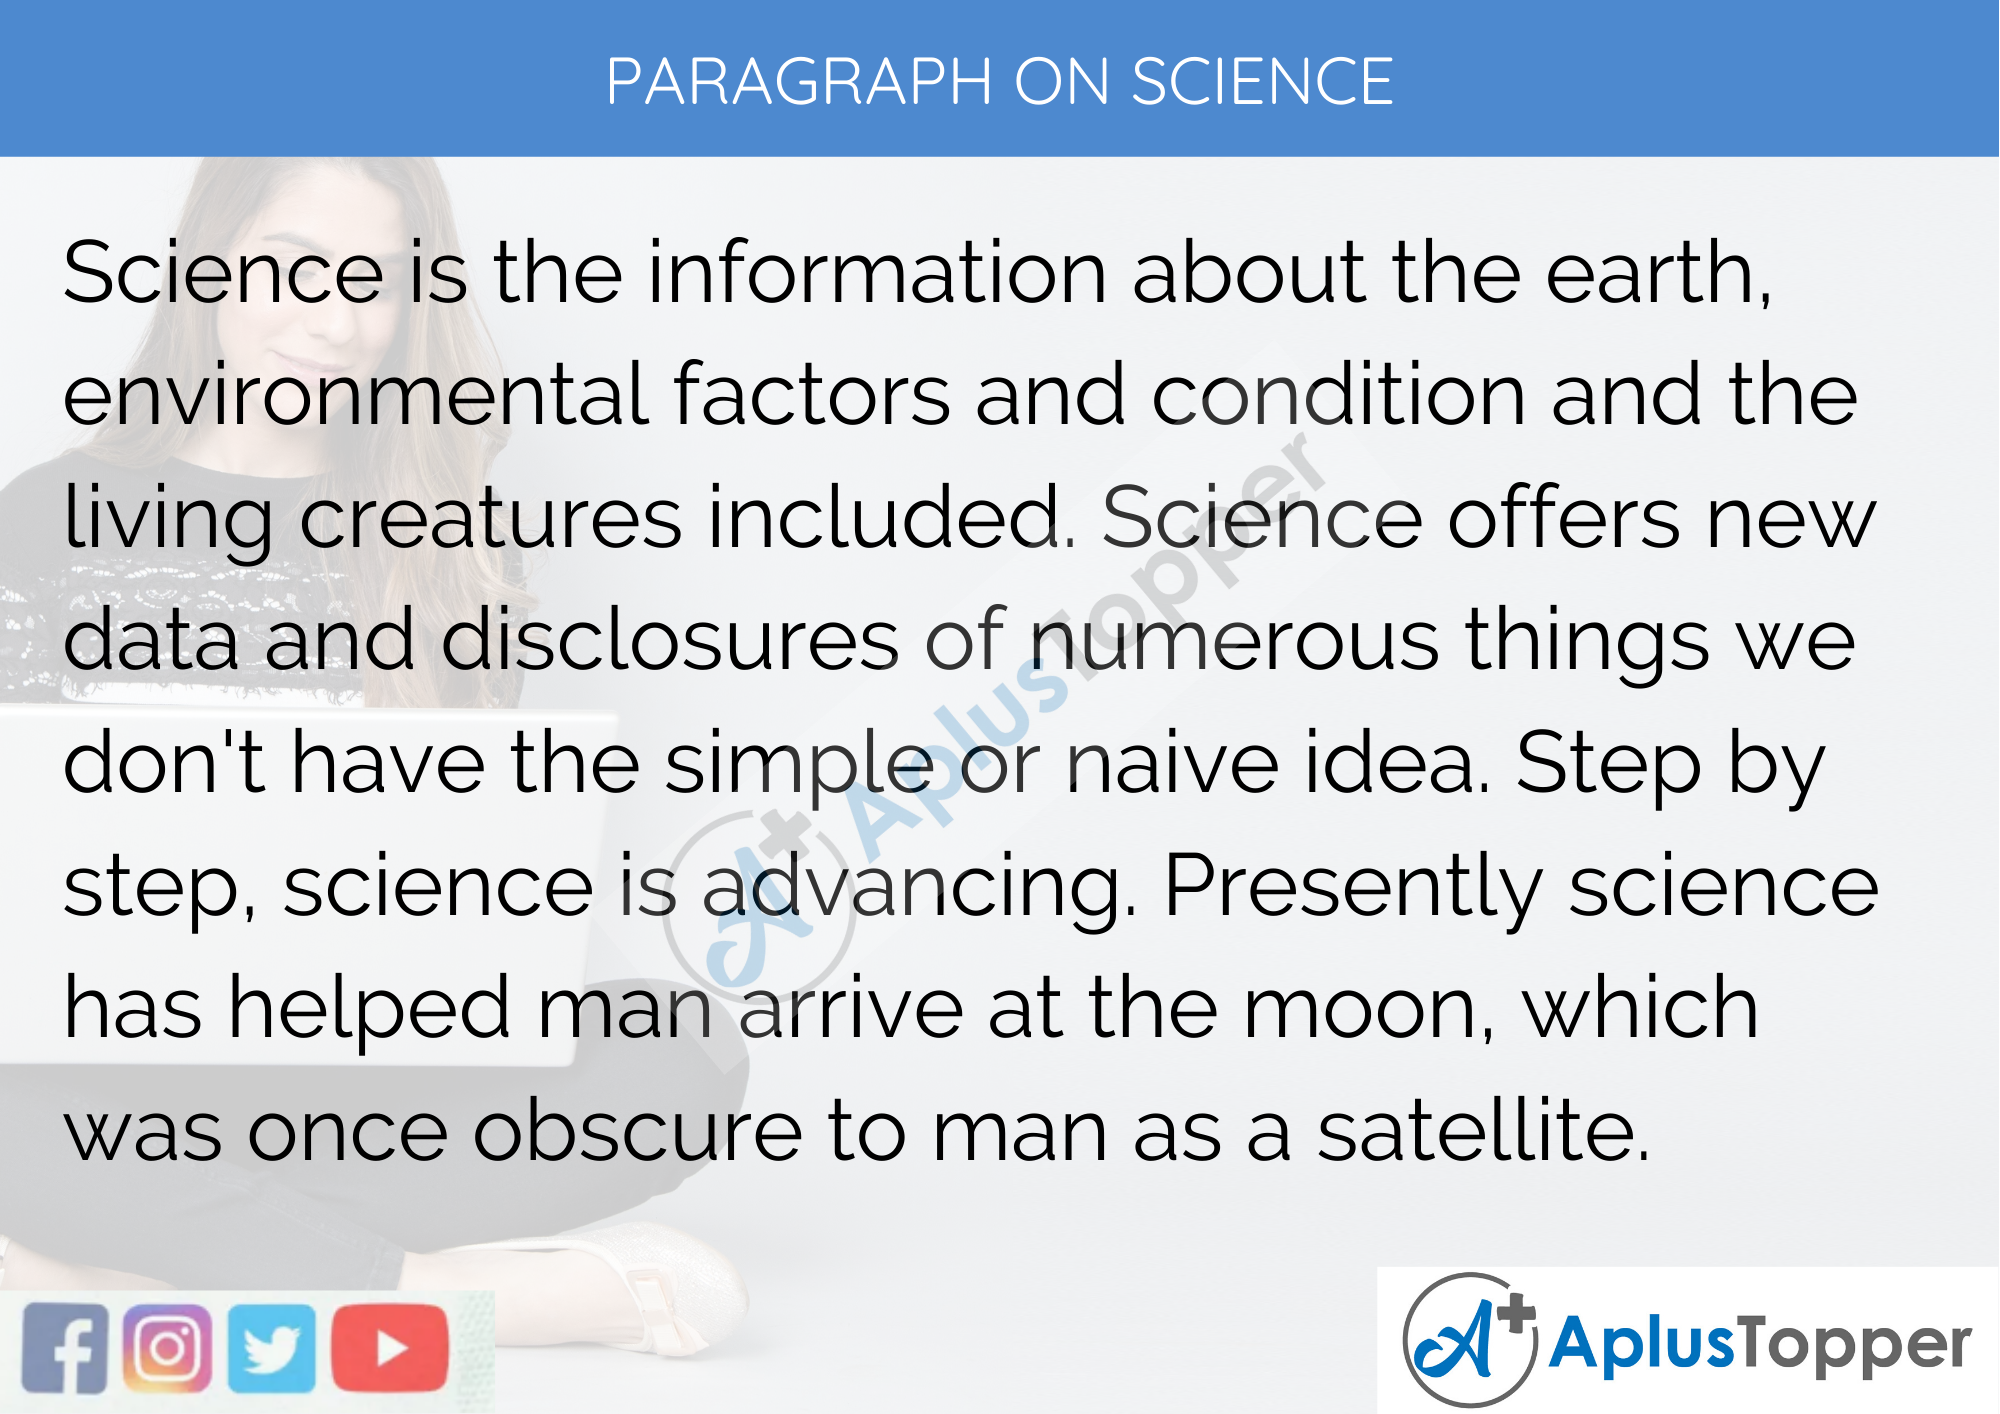 Paragraph On Science - 100 Words for Classes 1, 2, 3 Kids